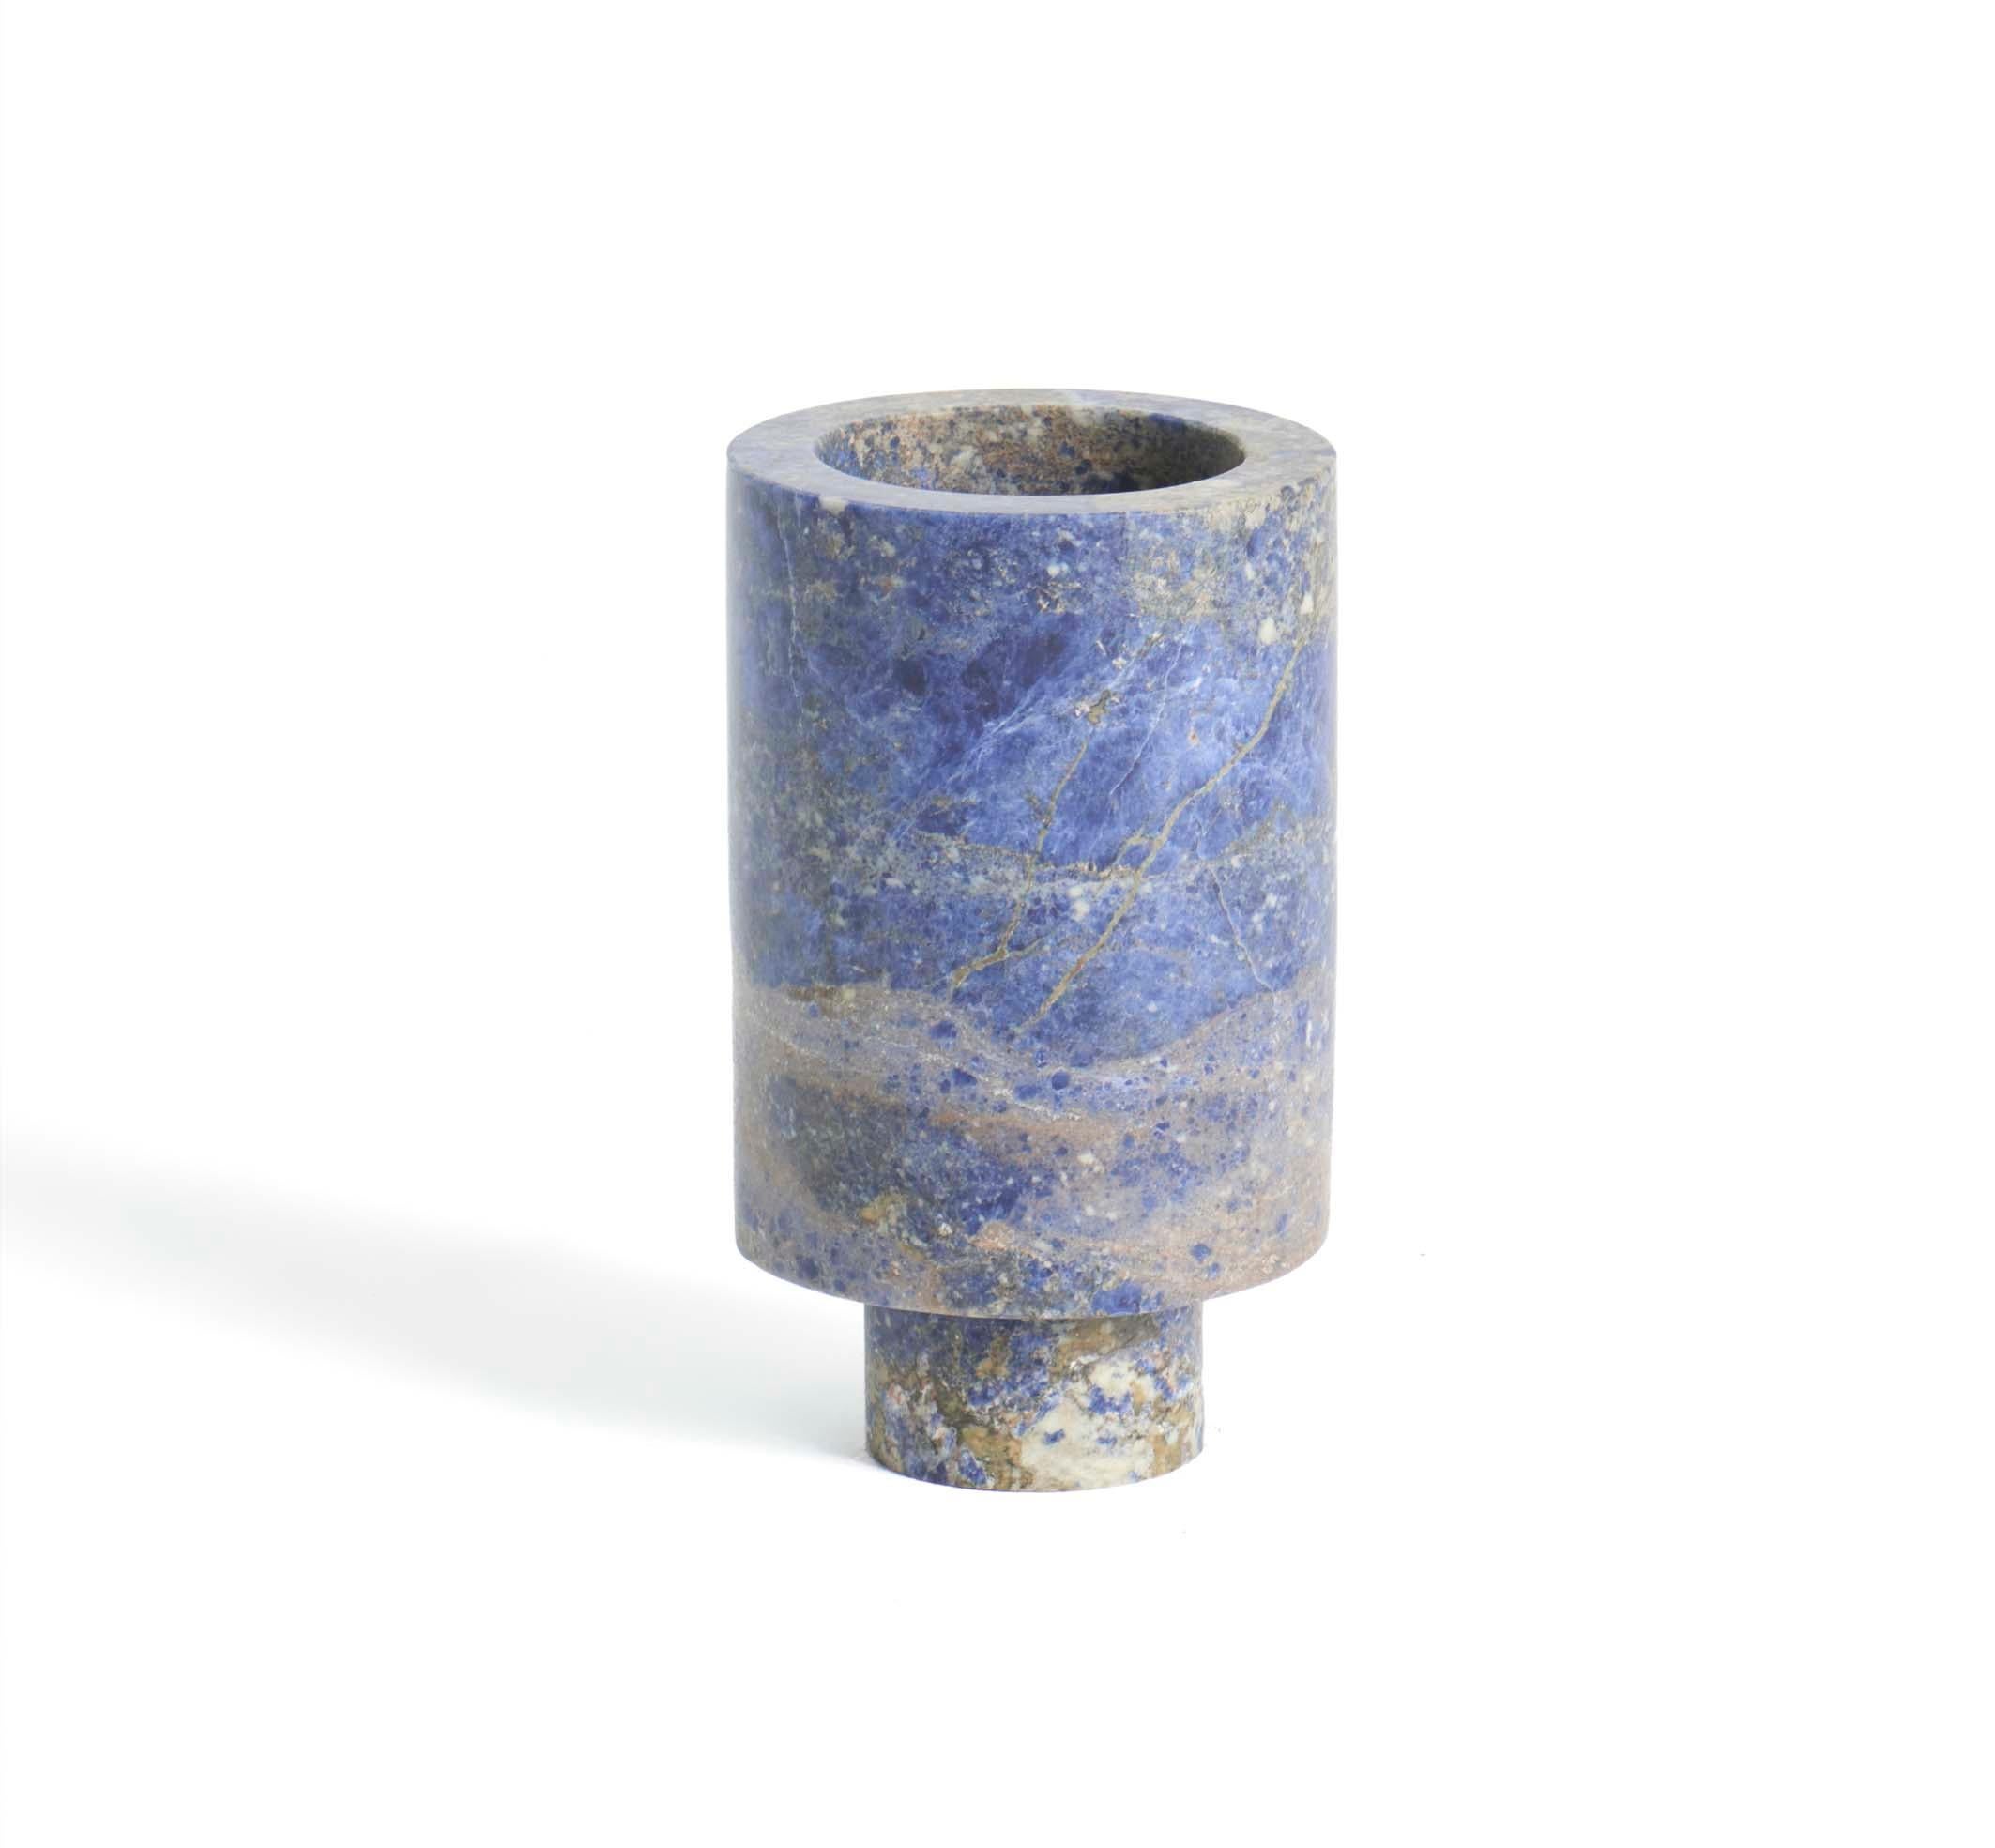 Blue inside out vase by Karen Chekerdjian
Dimensions: 8 x 24 cm
Materials: Blue Sodalite

Karen’s trajectory into designing was unsystematic, comprised of a combination of practical experience in various creative fields and endeavors.
After an